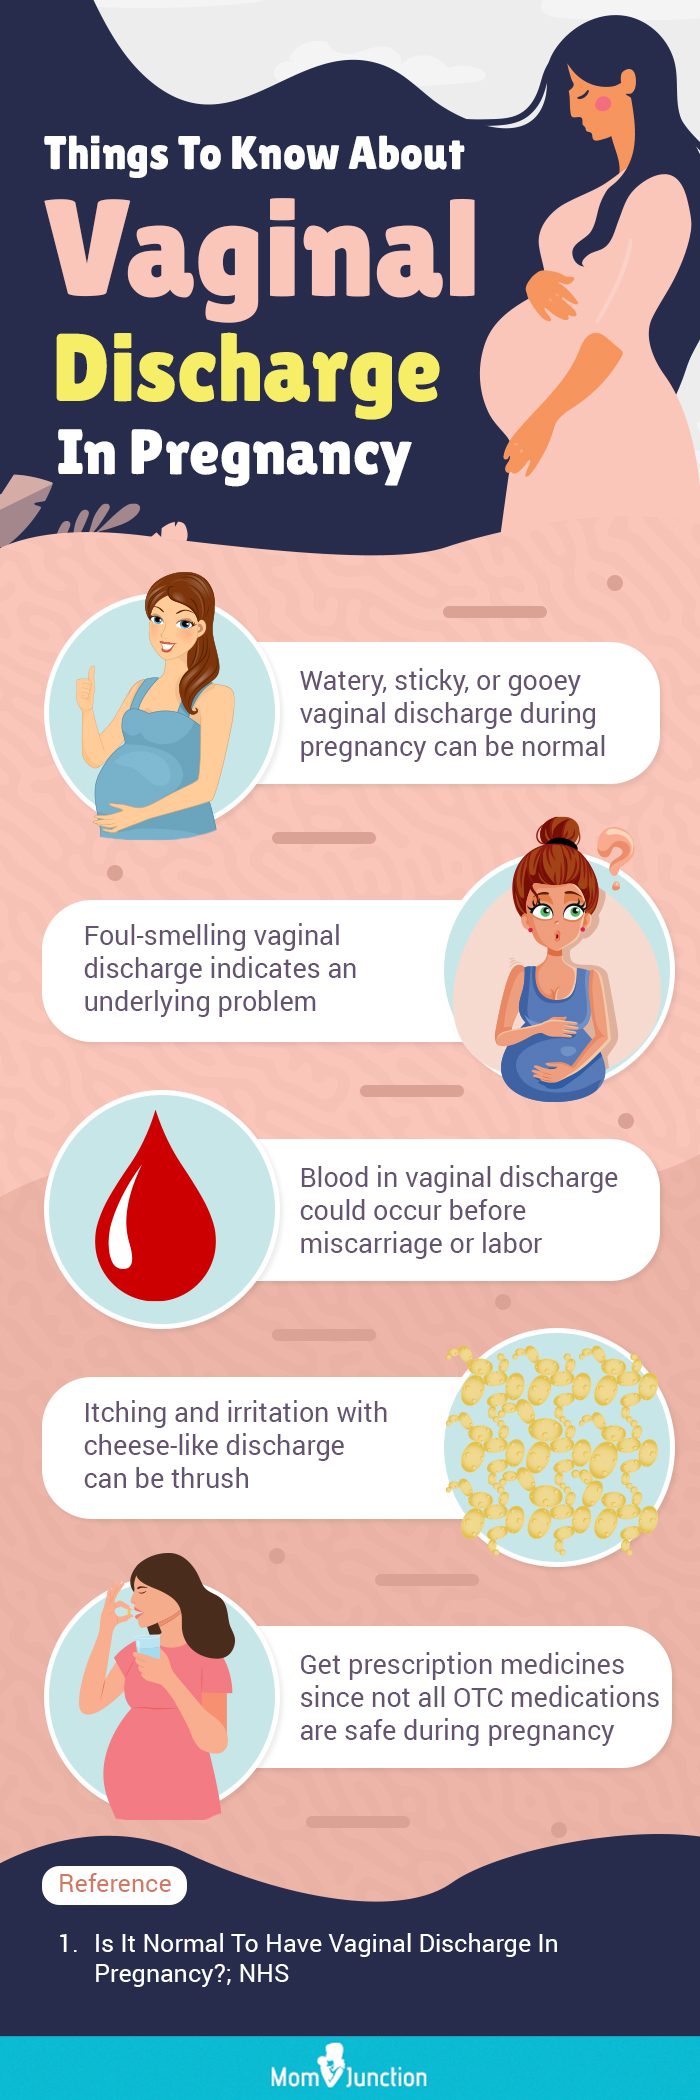 Vaginal Discharge During Pregnancy: Is It Normal?